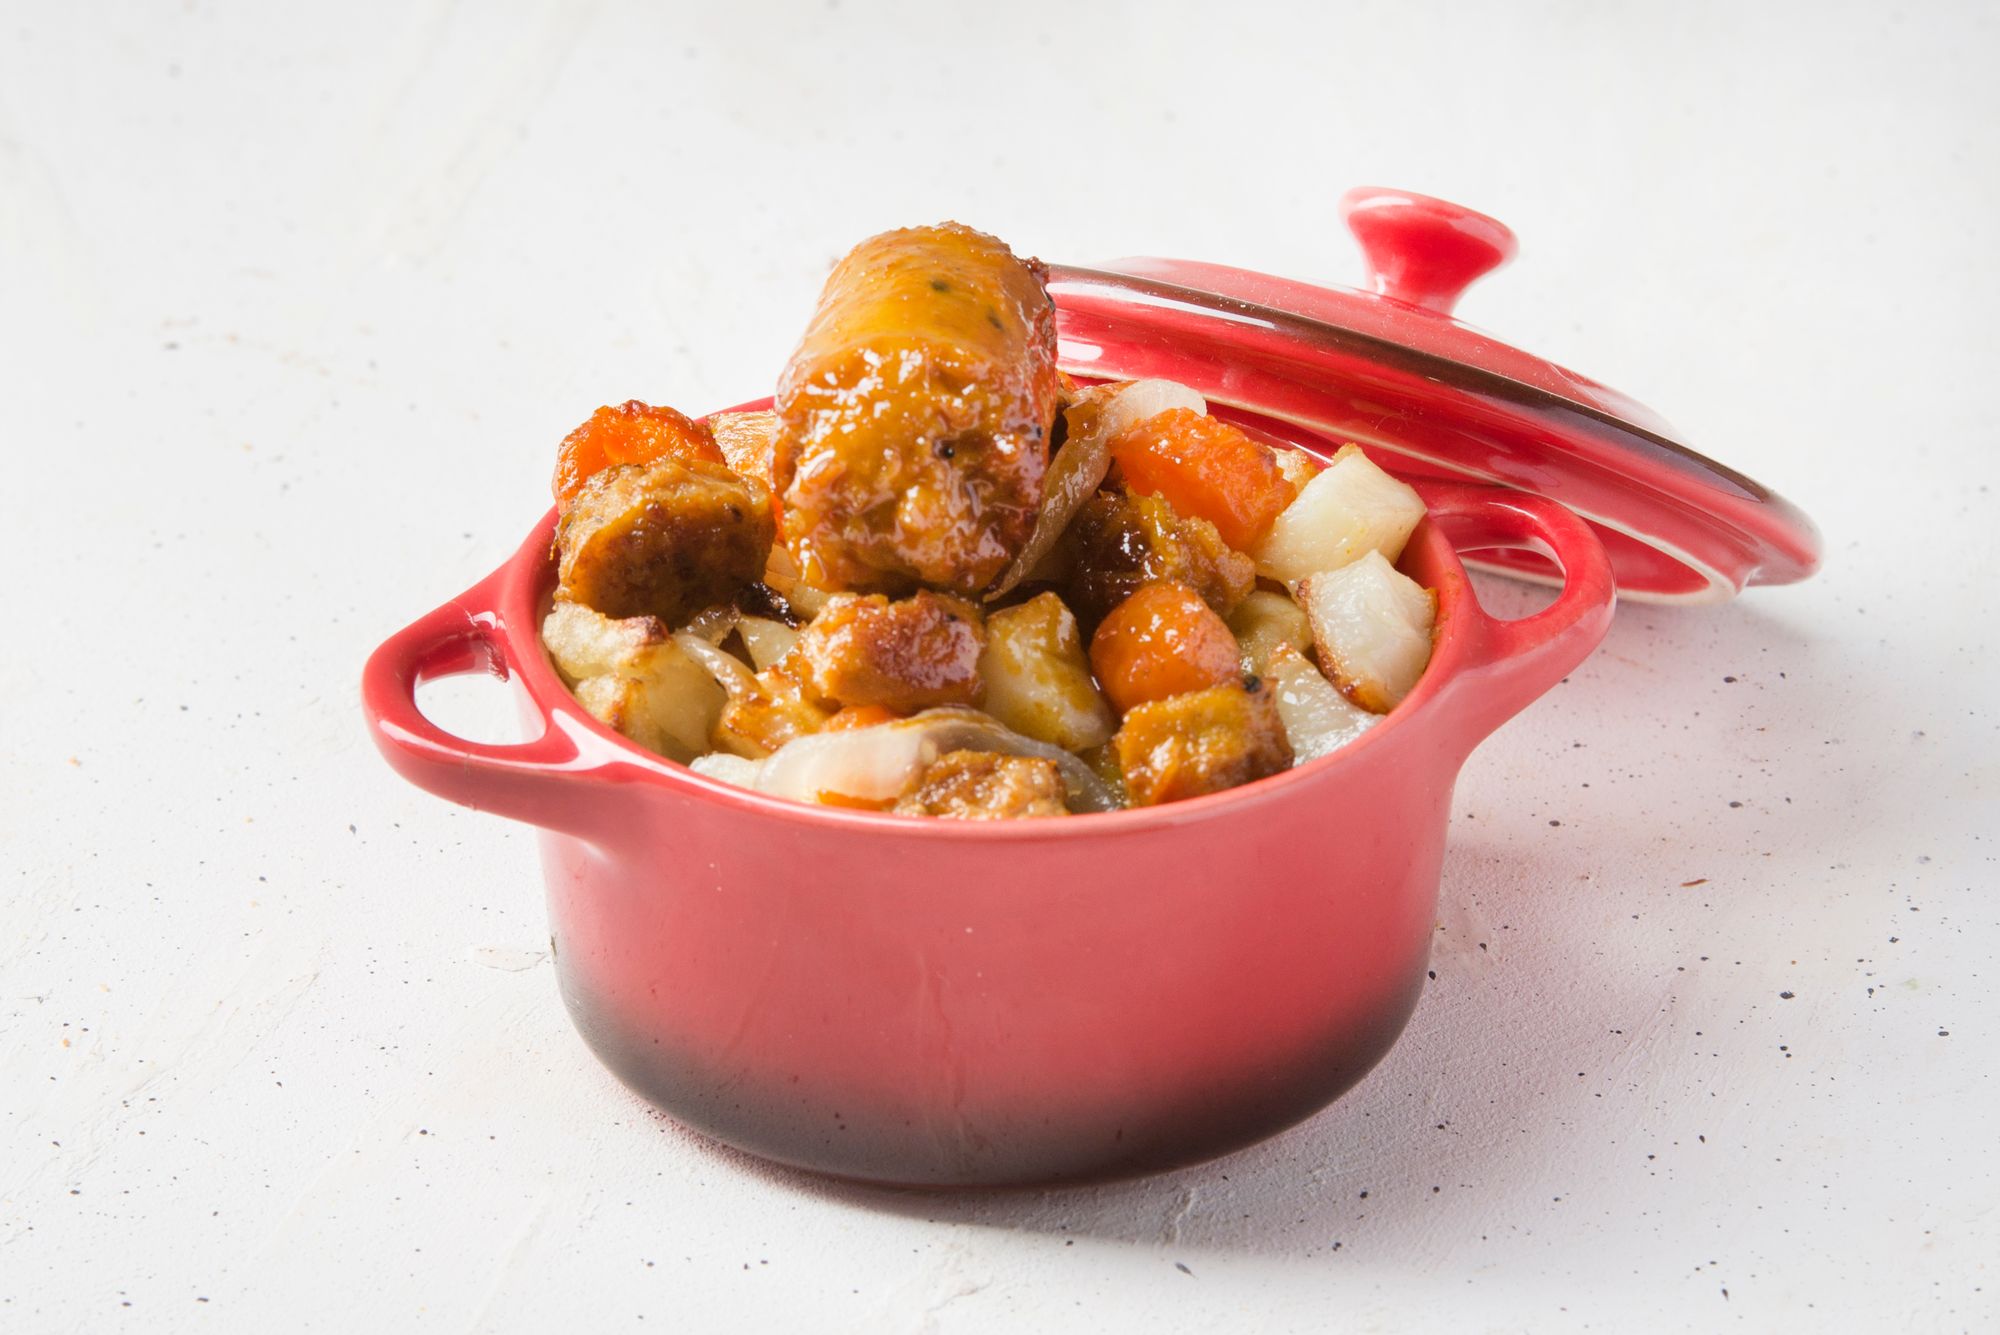 Sausage and Bacon Hotpot